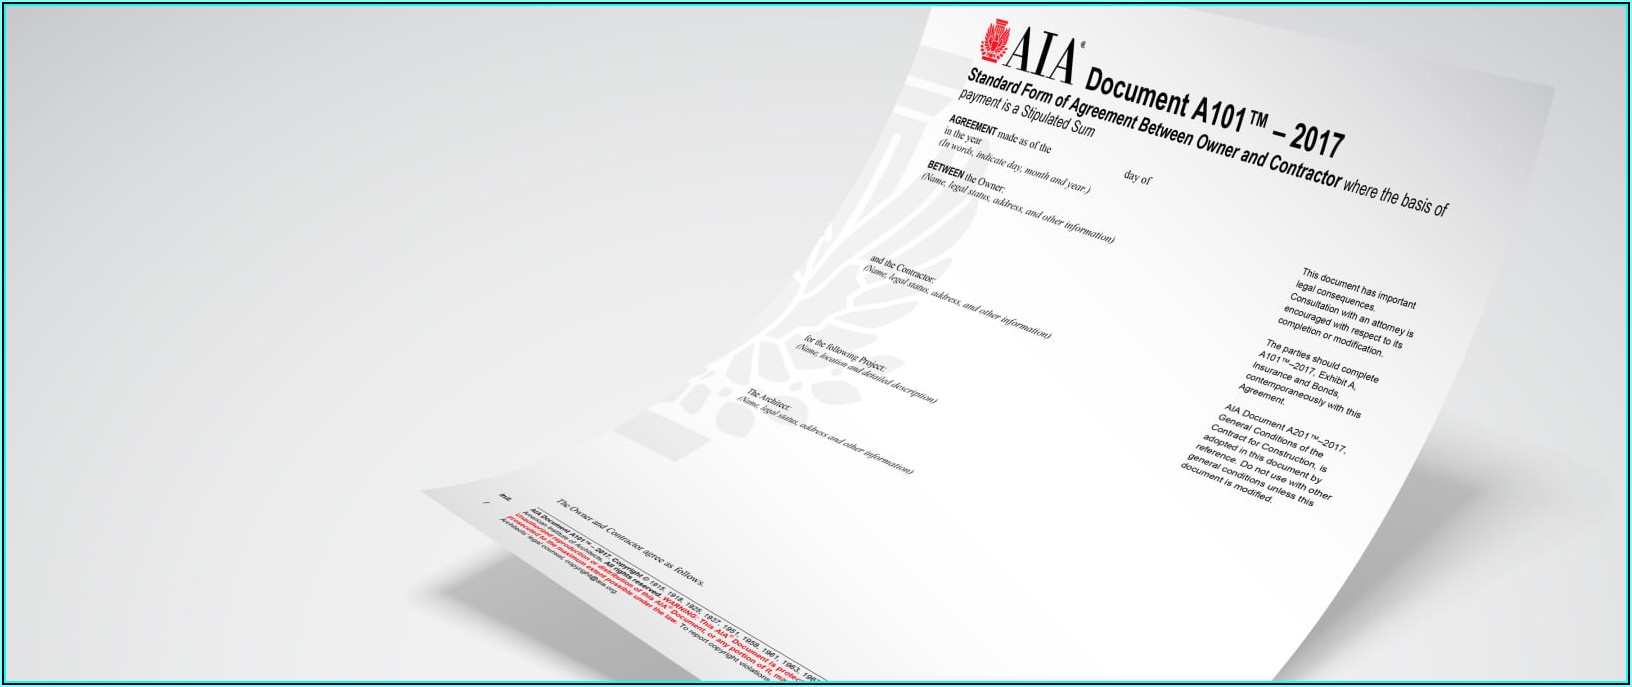 Aia Subcontractor Agreement Short Form Form Resume Examples n49mjkrYZz